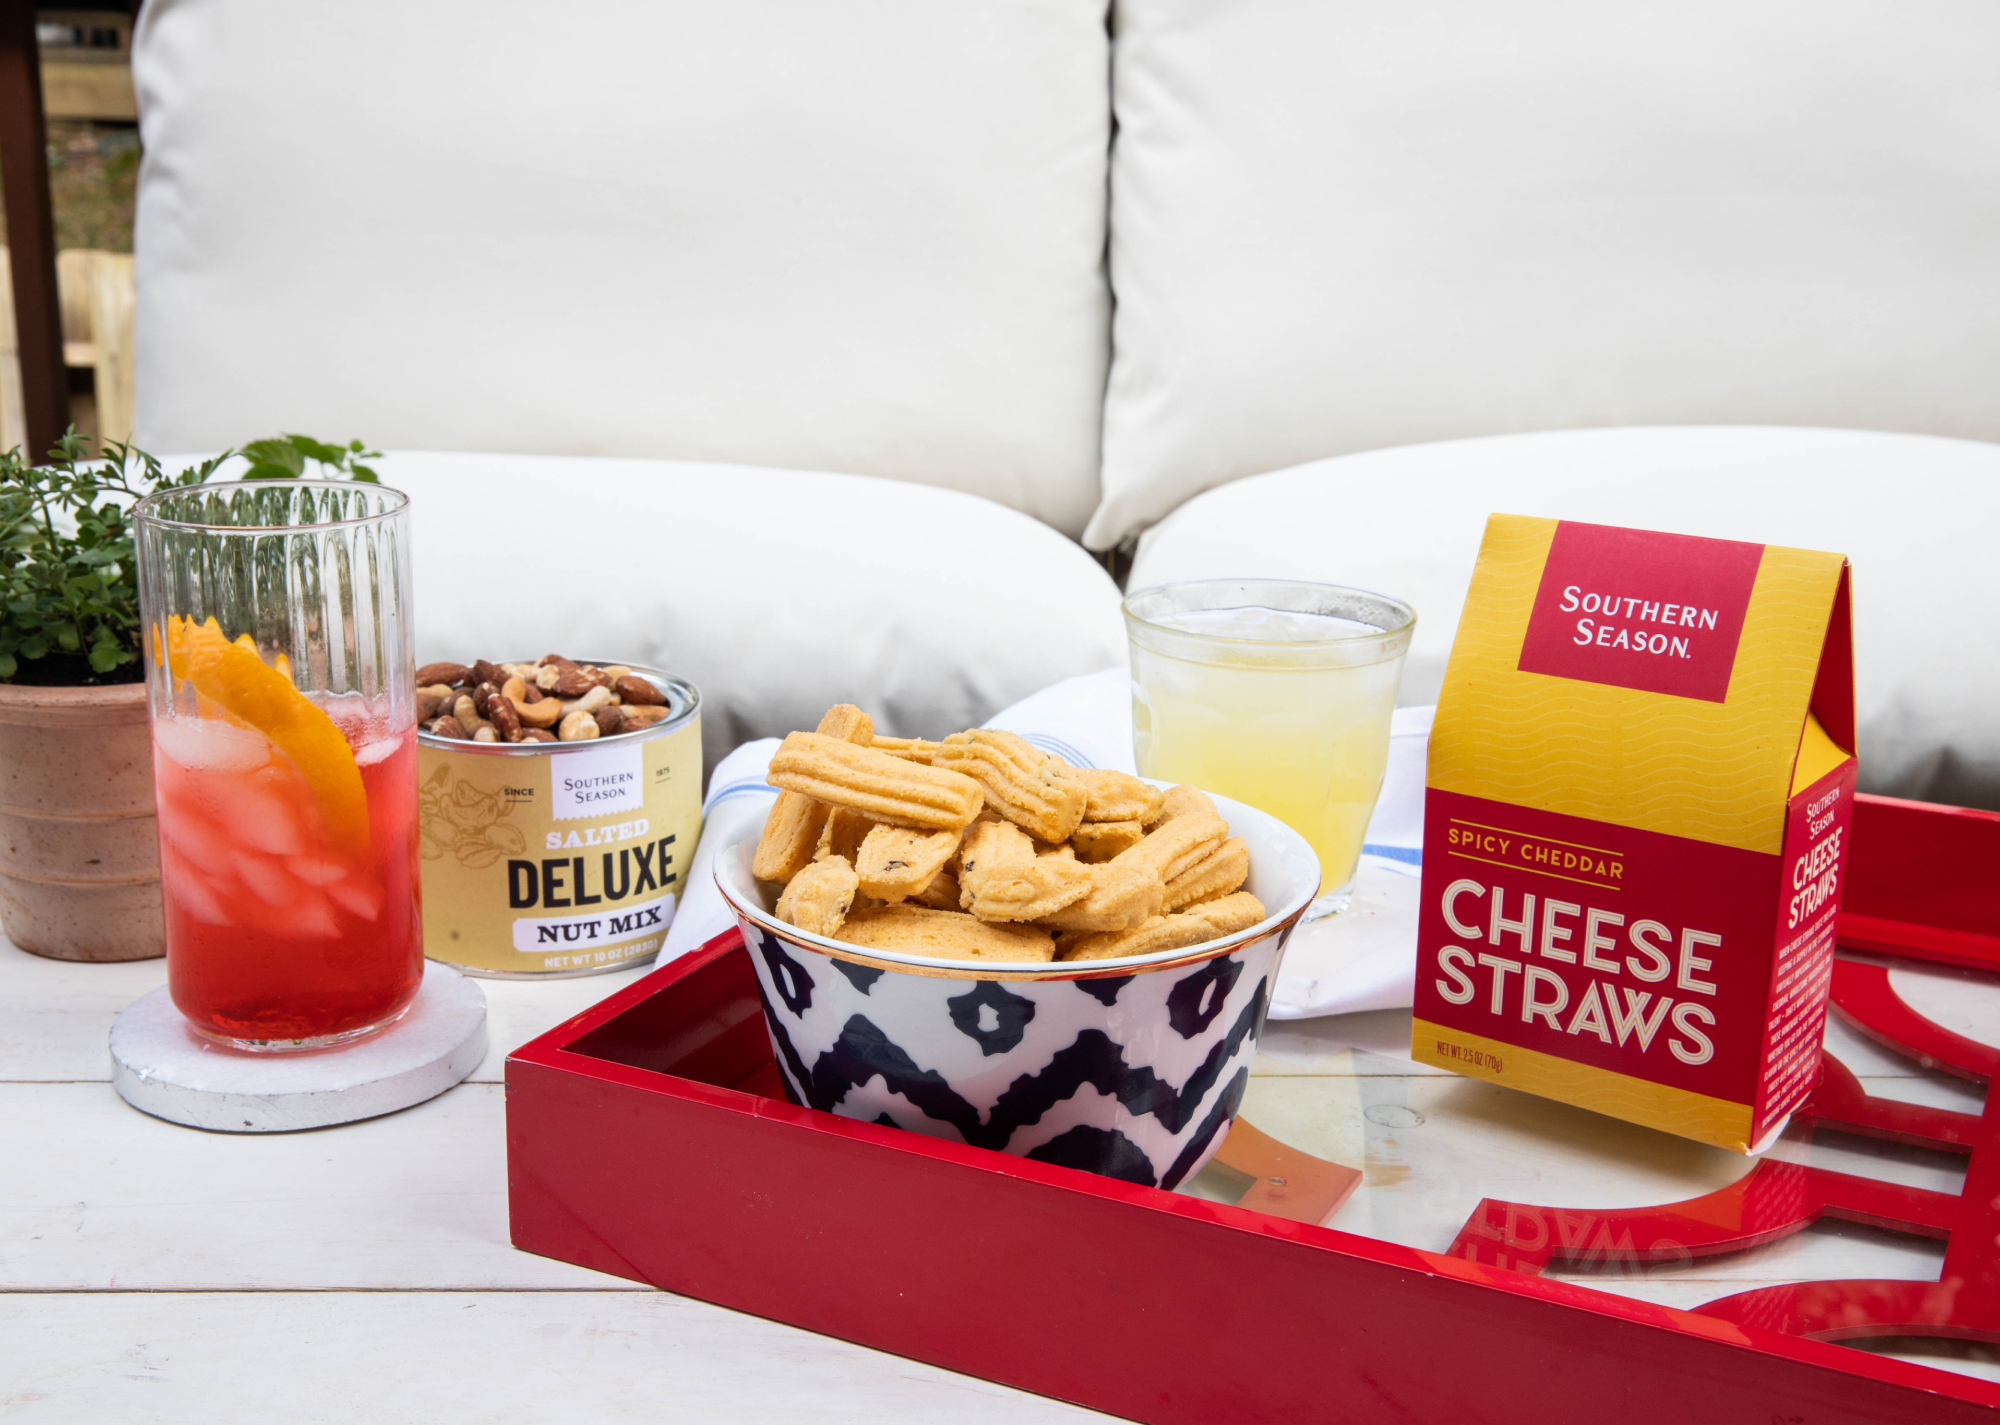 Southern Season's Deluxe Salted Nut Mix and Cheese Straws set out on a red tray on a patio table with lemonade